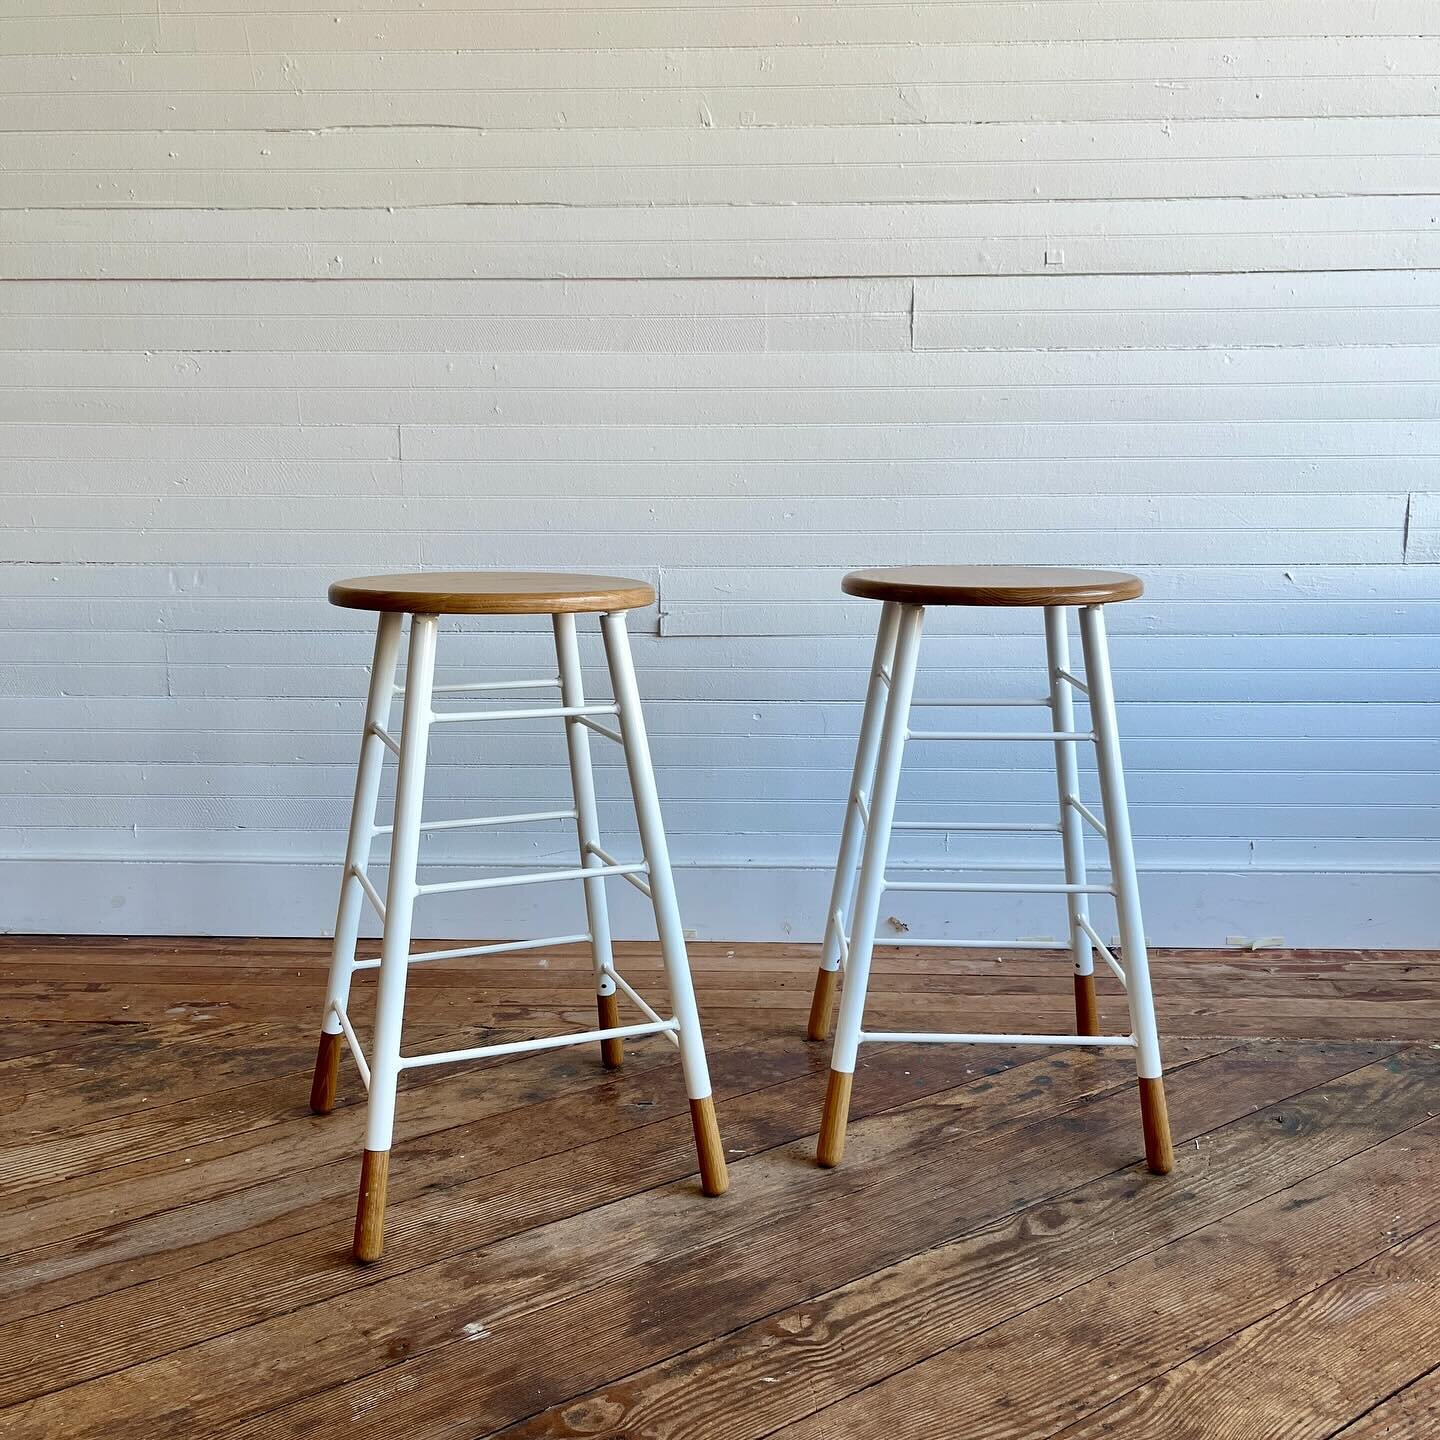 Pair of Lostine Gordon Counter Height stools.  Heavy iron base with with oak seat / feet.  Some minor scuffing to frame, seat has a scuff on side shown in photos.

28&rdquo; tall x 16&rdquo; w at base

$345 for the pair (retail for $585 each)